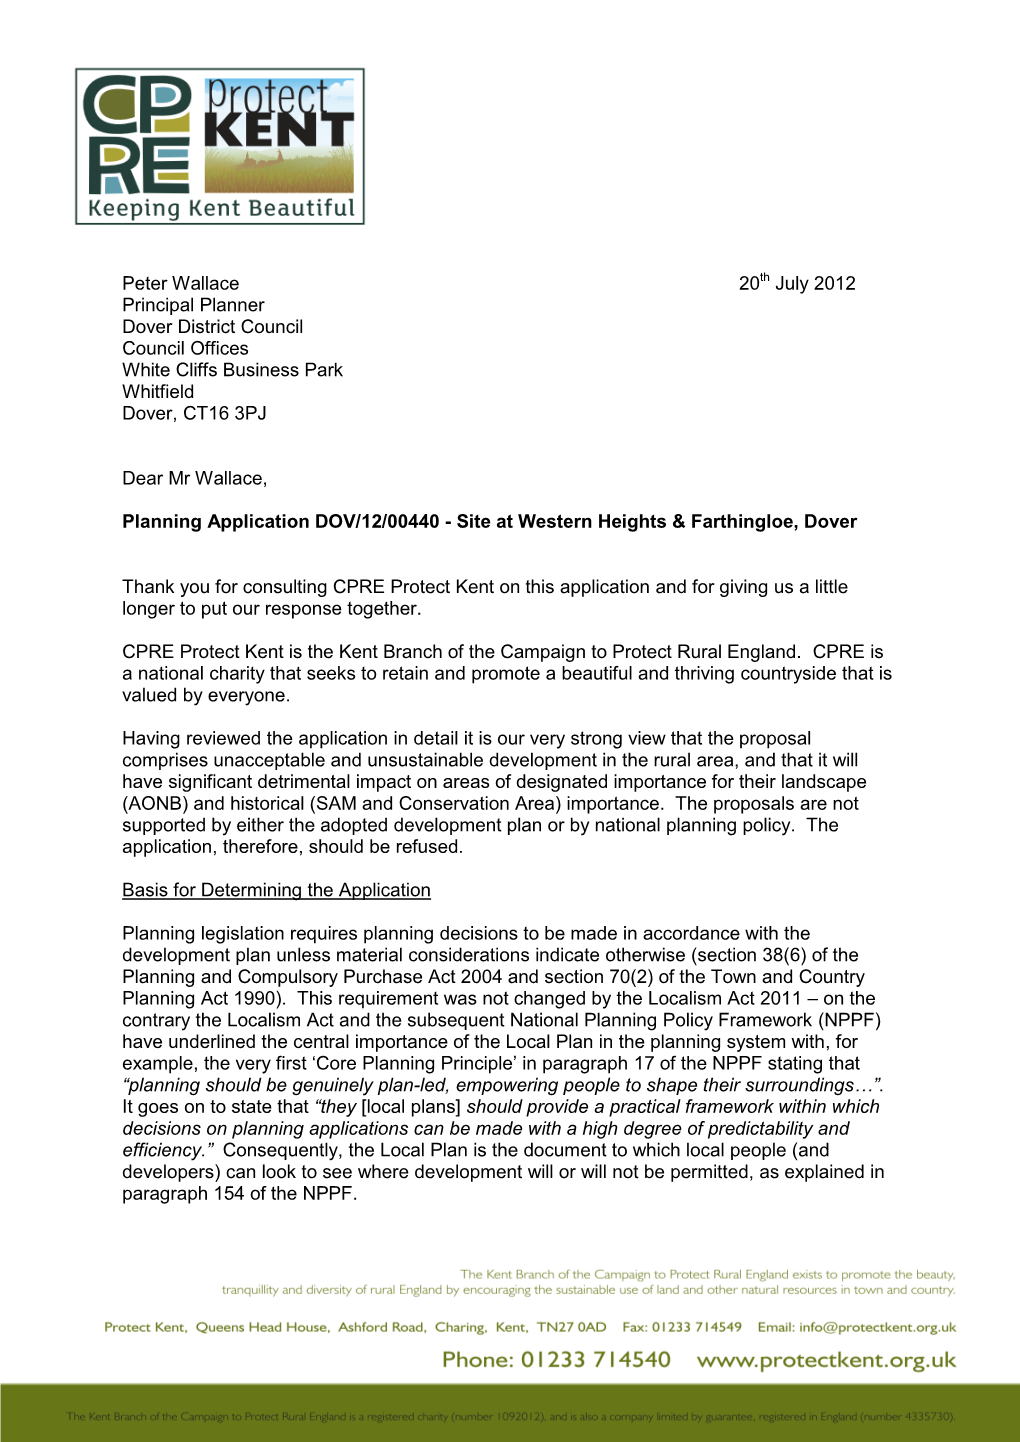 Letter on Western Heights and Farthingloe July 2012